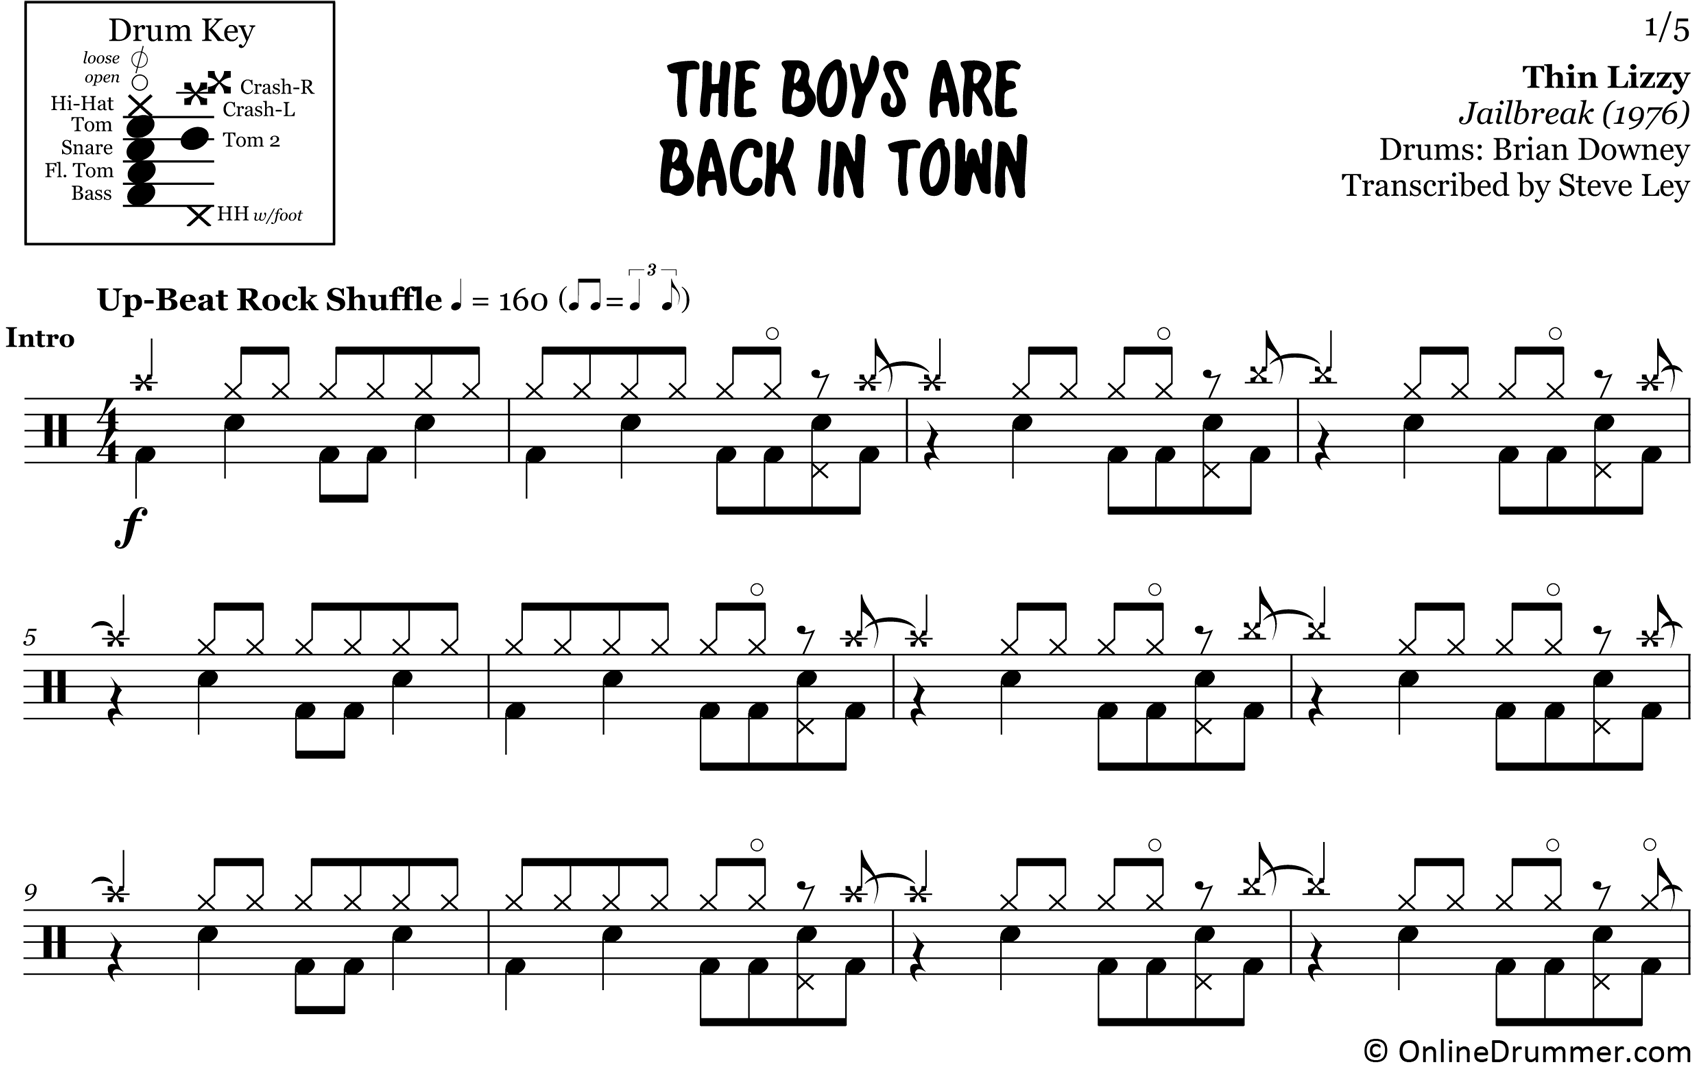 The Boys Are Back In Town - Thin Lizzy - Drum Sheet Music